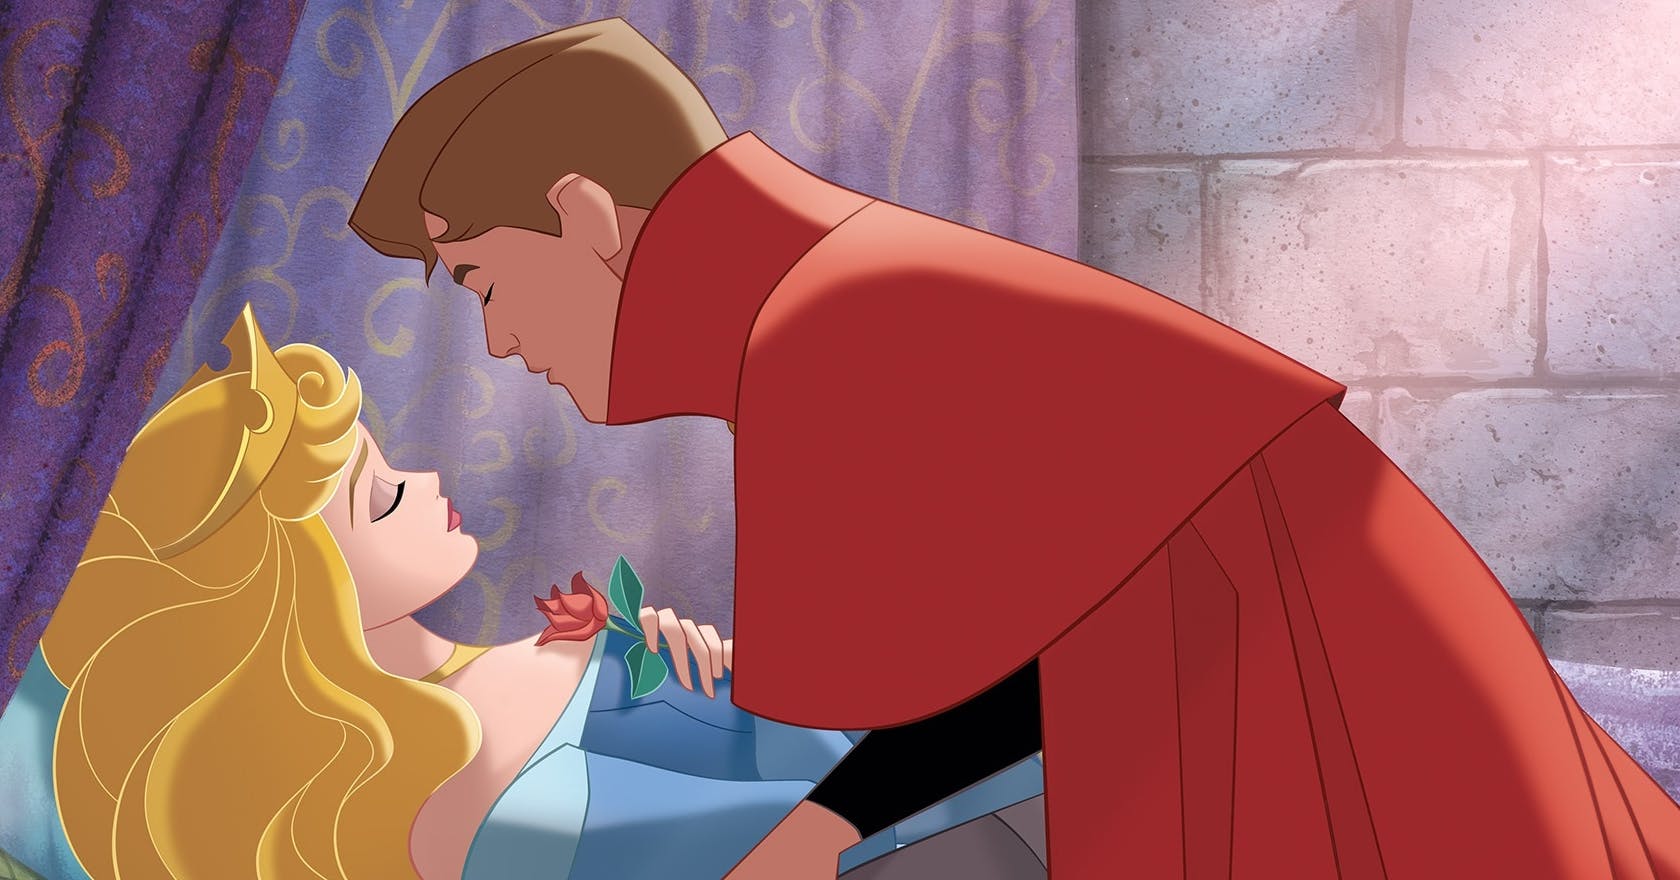 Does Sleeping Beauty promote a dangerous message about sexual consent?